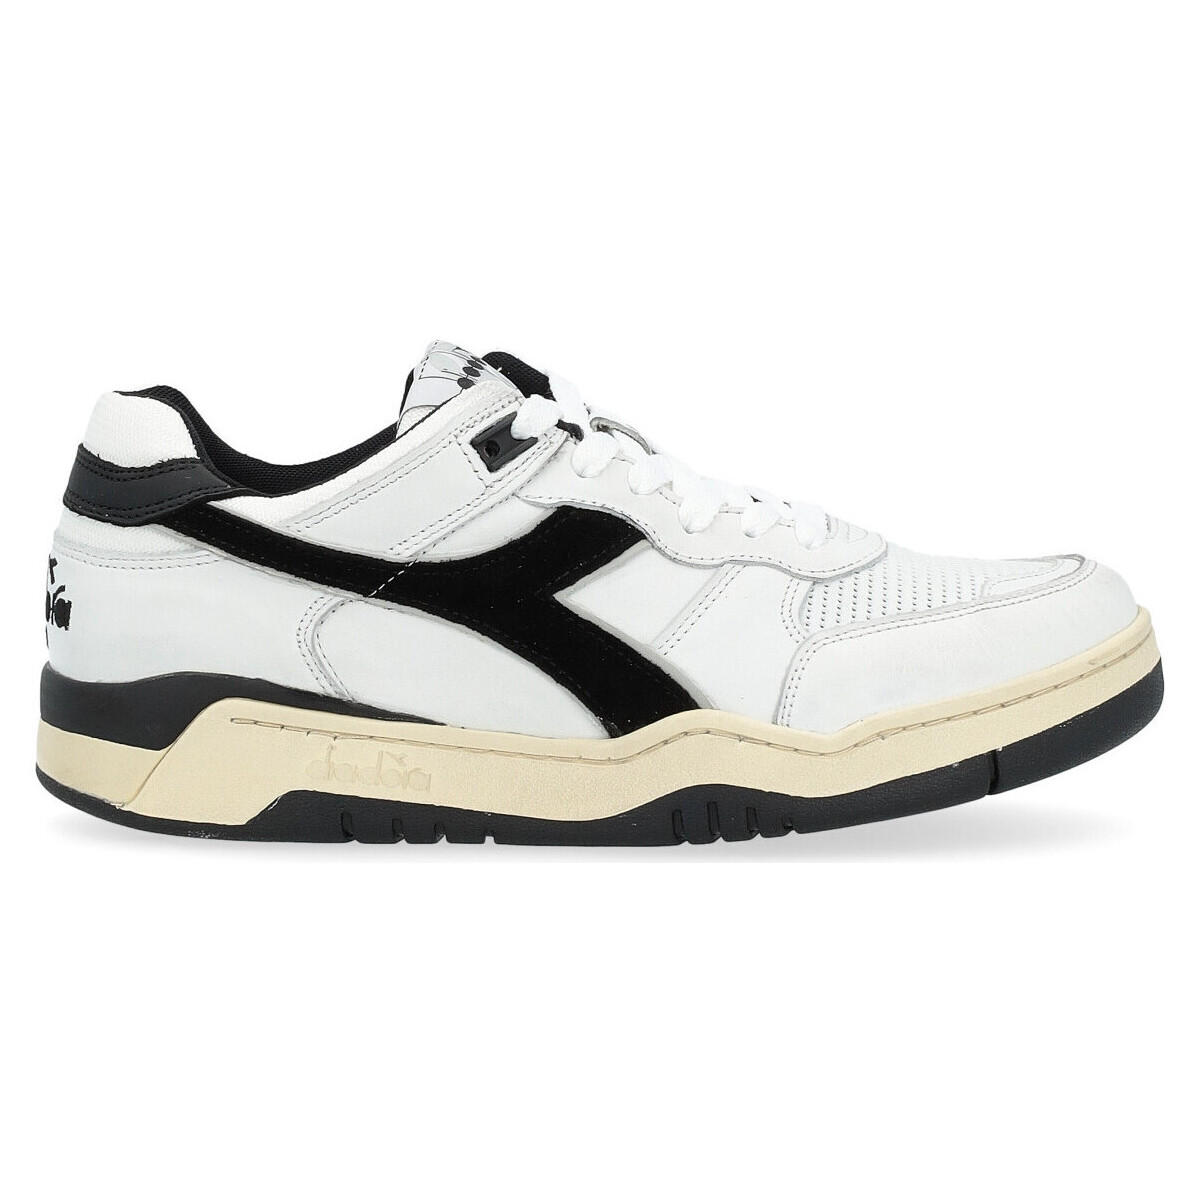 Chaussures look sharp and feel amazing in the Diadora Mythos 7 Vortice HIP Baskets Diadora B560 Used noir et blanc Autres